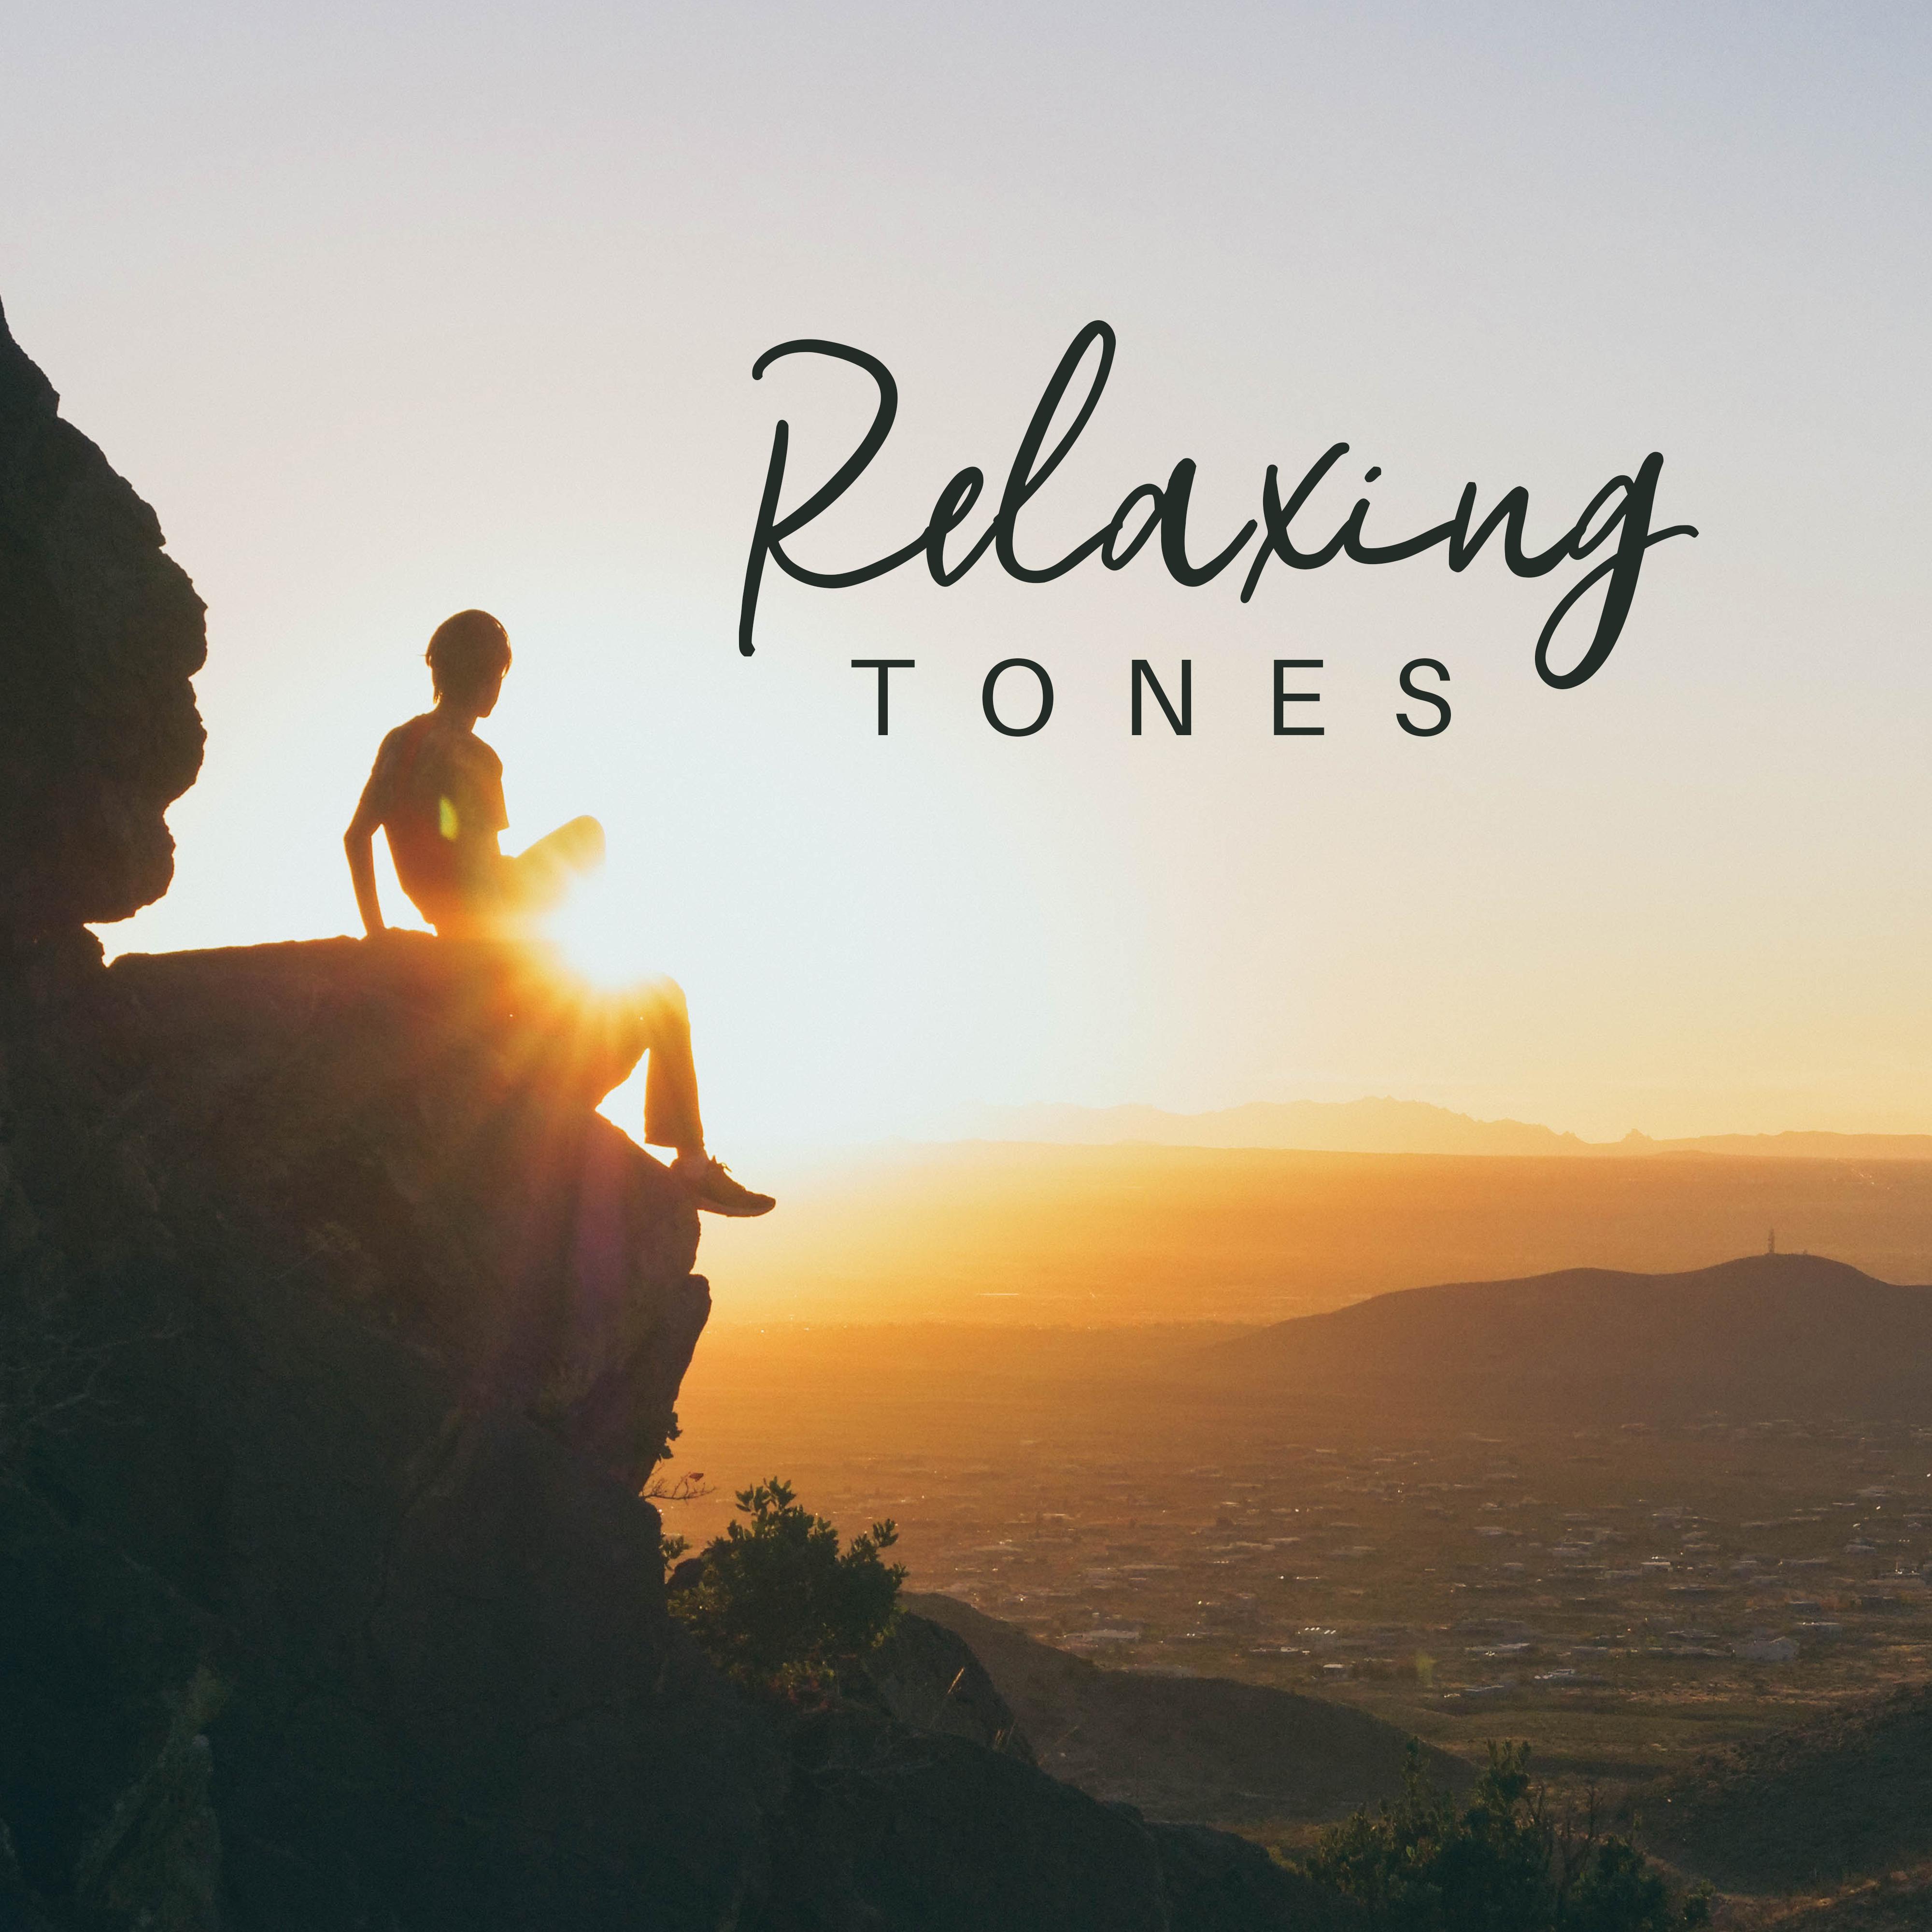 Relaxing Tones: 15 Tracks that' ll Completely Unwind You, Help You Relax, Stress Away and Rest